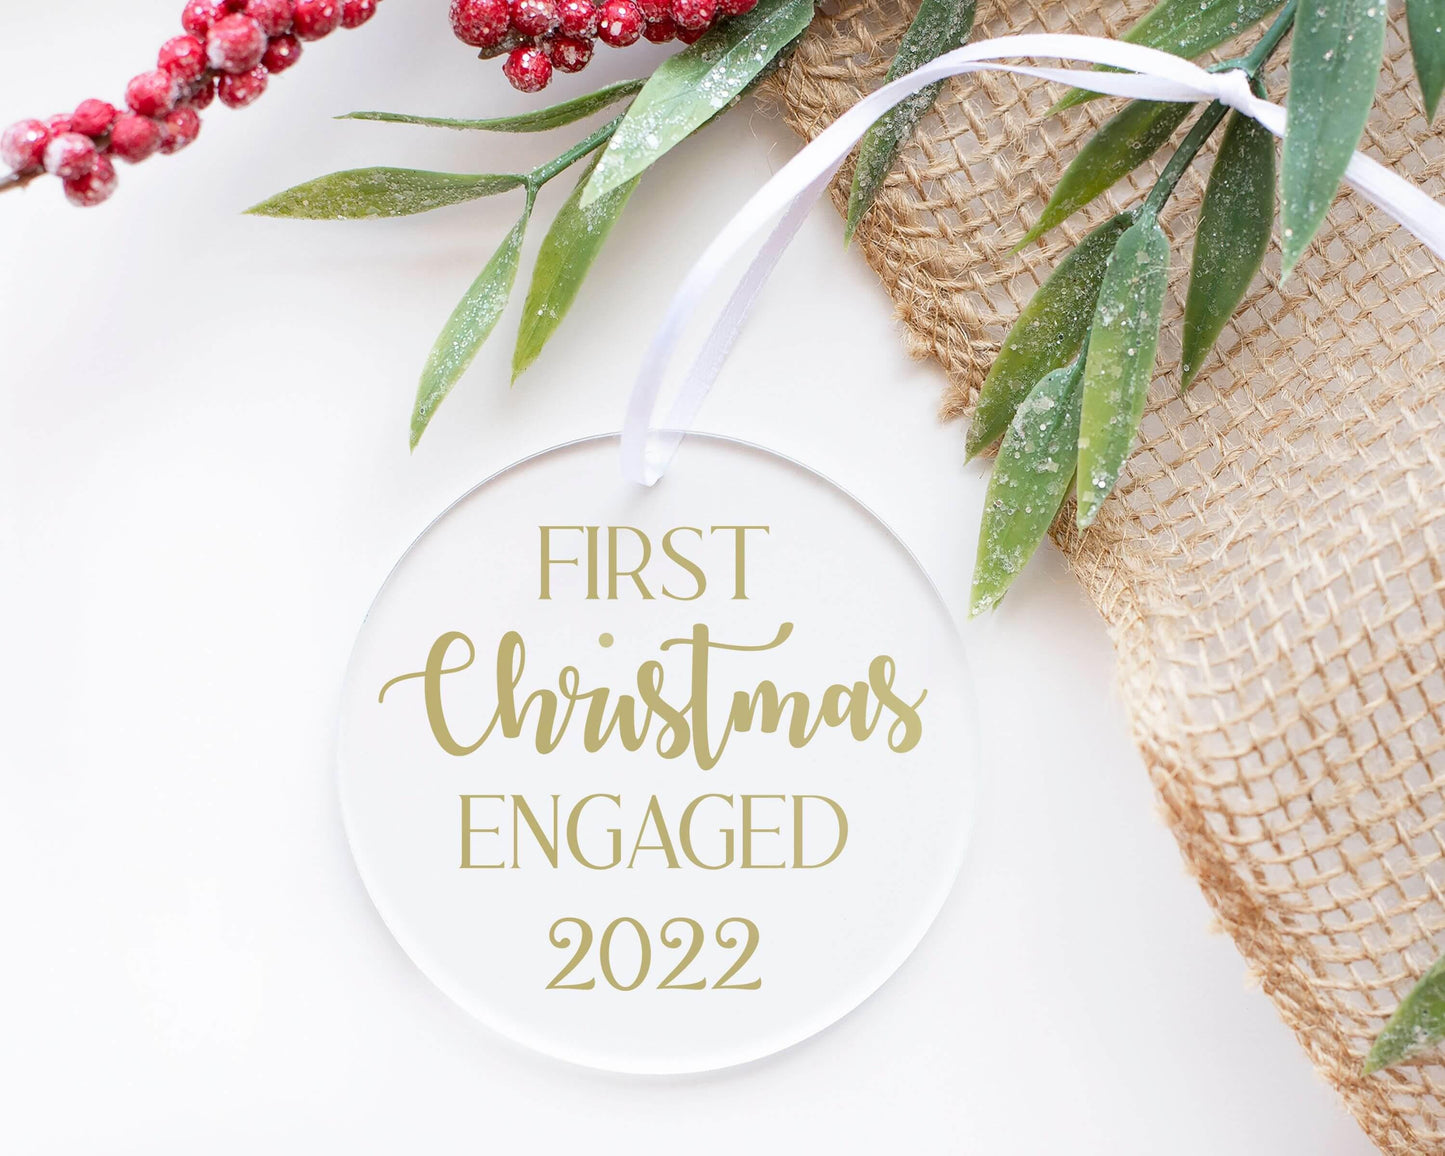 First Christmas Engaged 2022 Acrylic Ornament